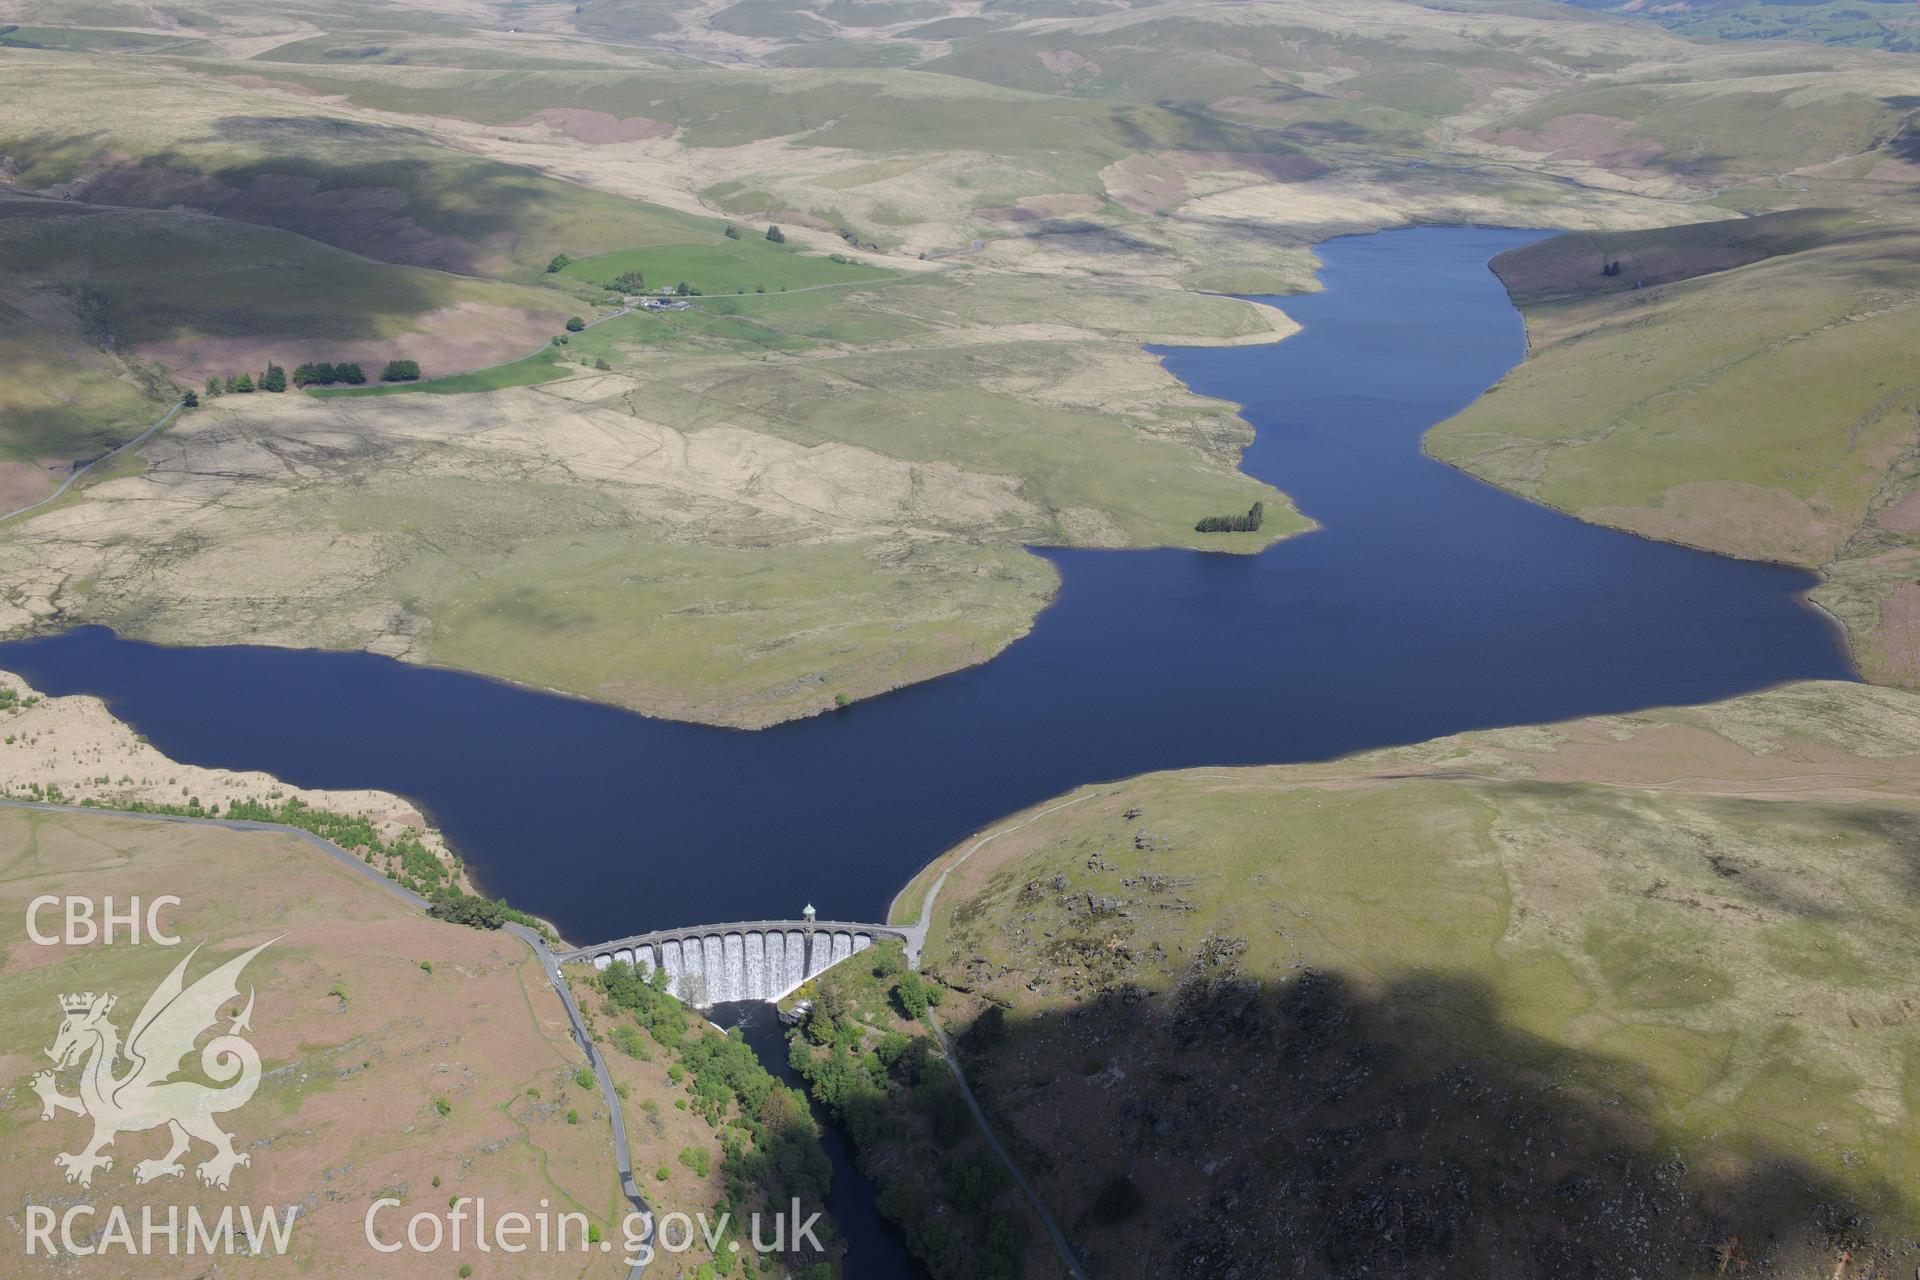 Pen-y-Garreg reservoir, and Craig Goch dam and valve tower. Oblique aerial photograph taken during the Royal Commission's programme of archaeological aerial reconnaissance by Toby Driver on 3rd June 2015.